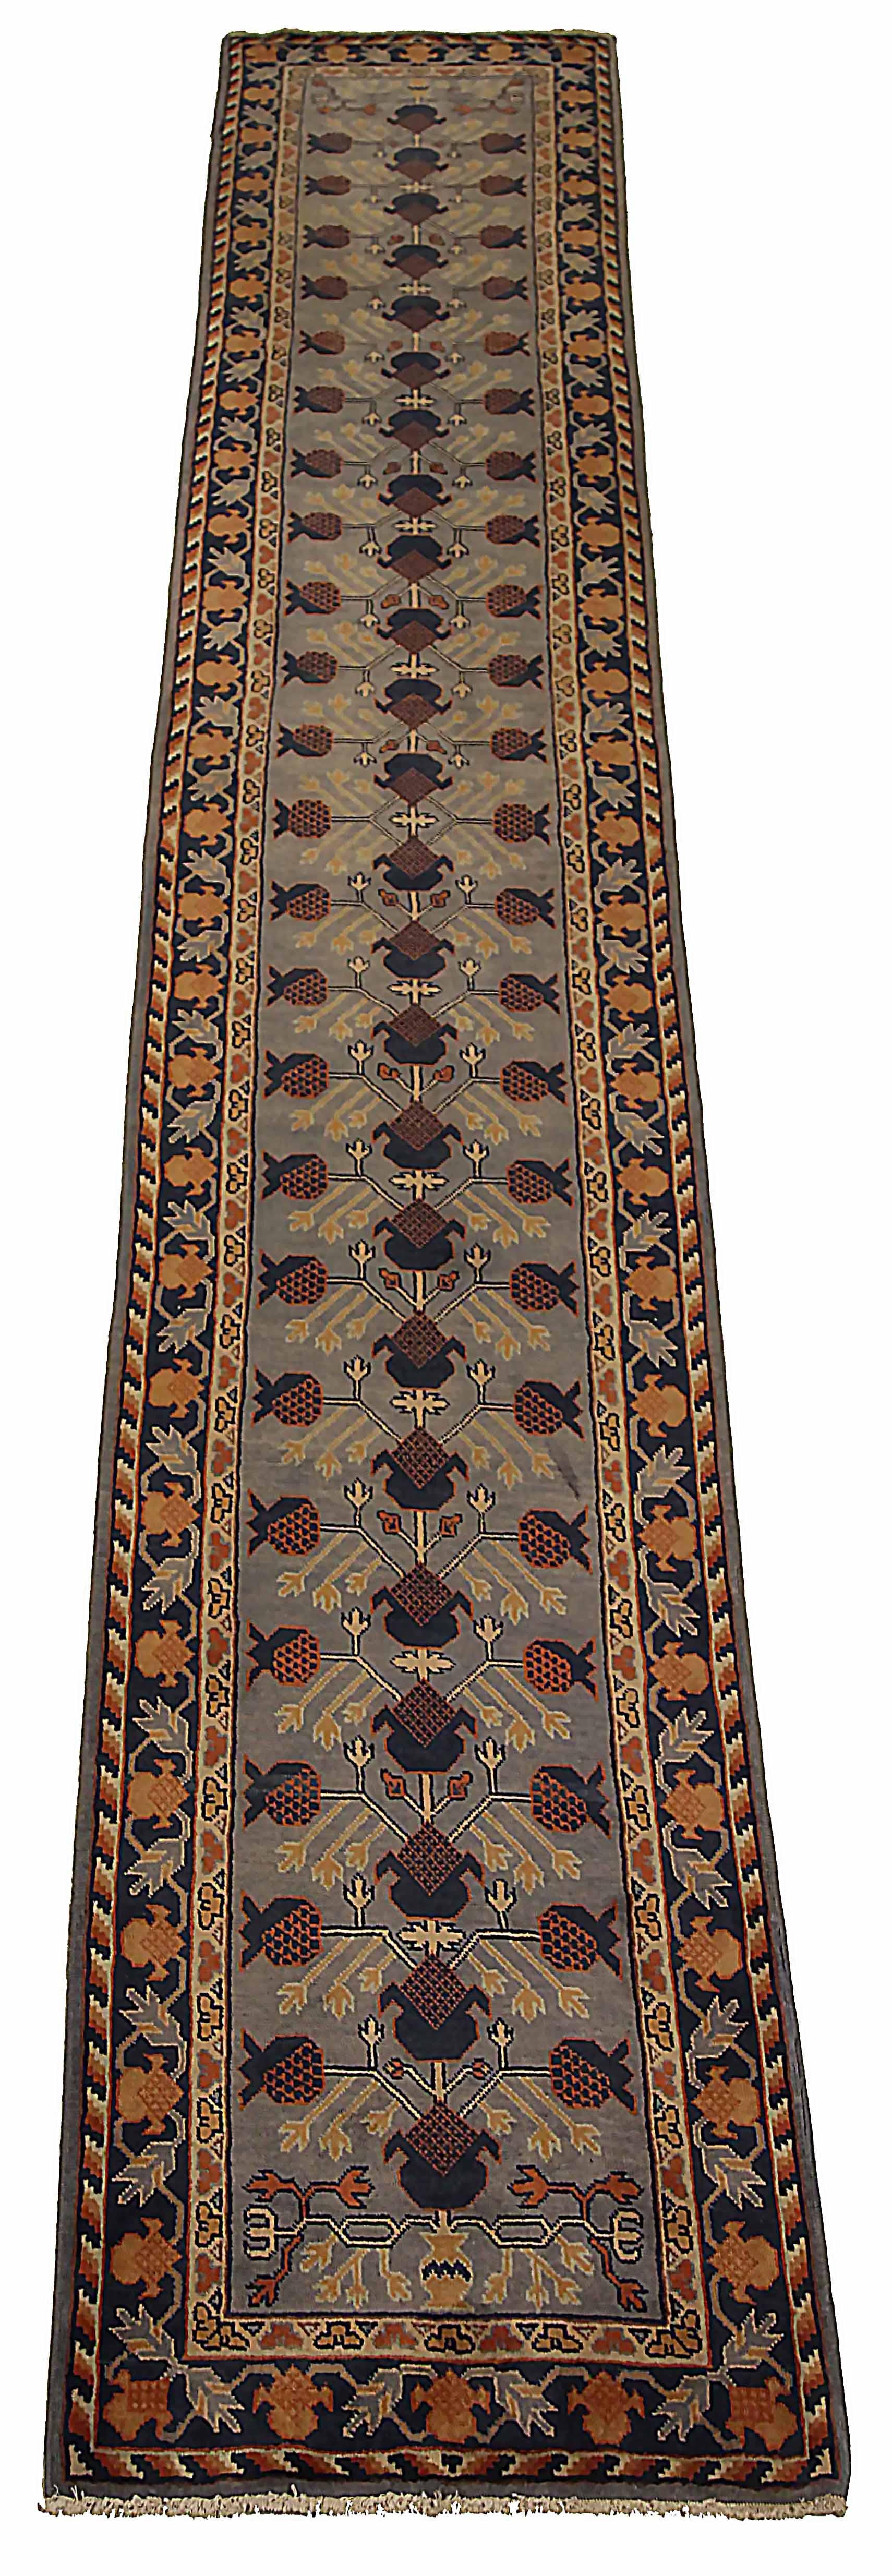 Antique Russian runner rug handwoven from the finest sheep’s wool. It’s colored with all-natural vegetable dyes that are safe for humans and pets. It’s a traditional Khotan design handwoven by expert artisans. It’s a lovely runner rug that can be